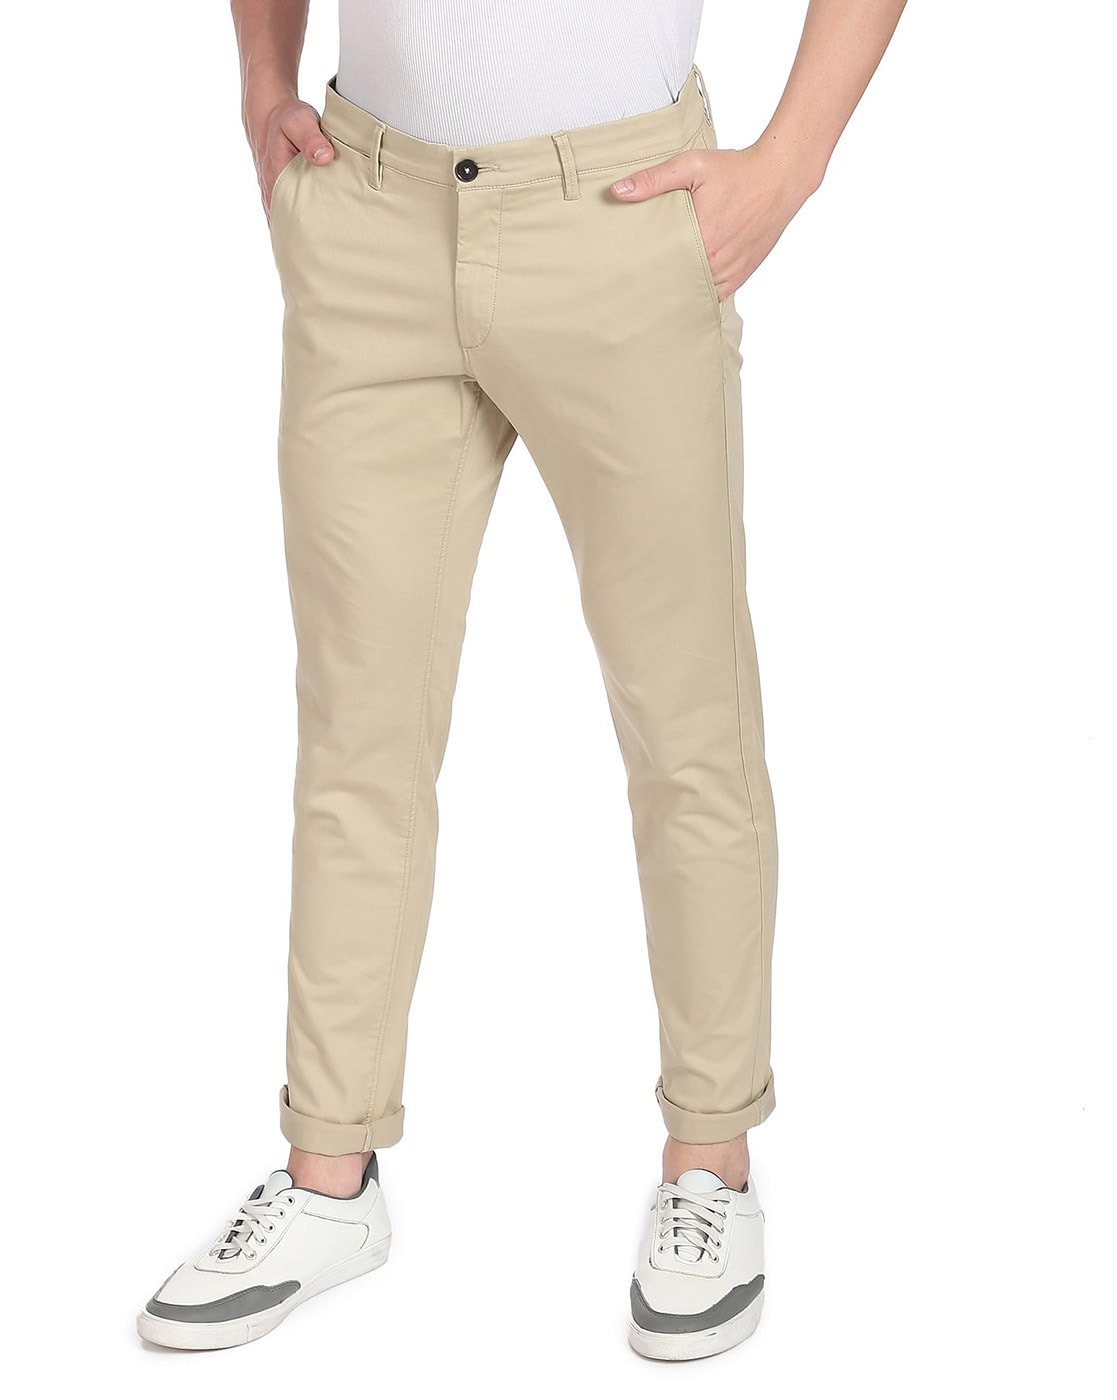 Buy Louis Philippe Blue Trousers Online  713104  Louis Philippe